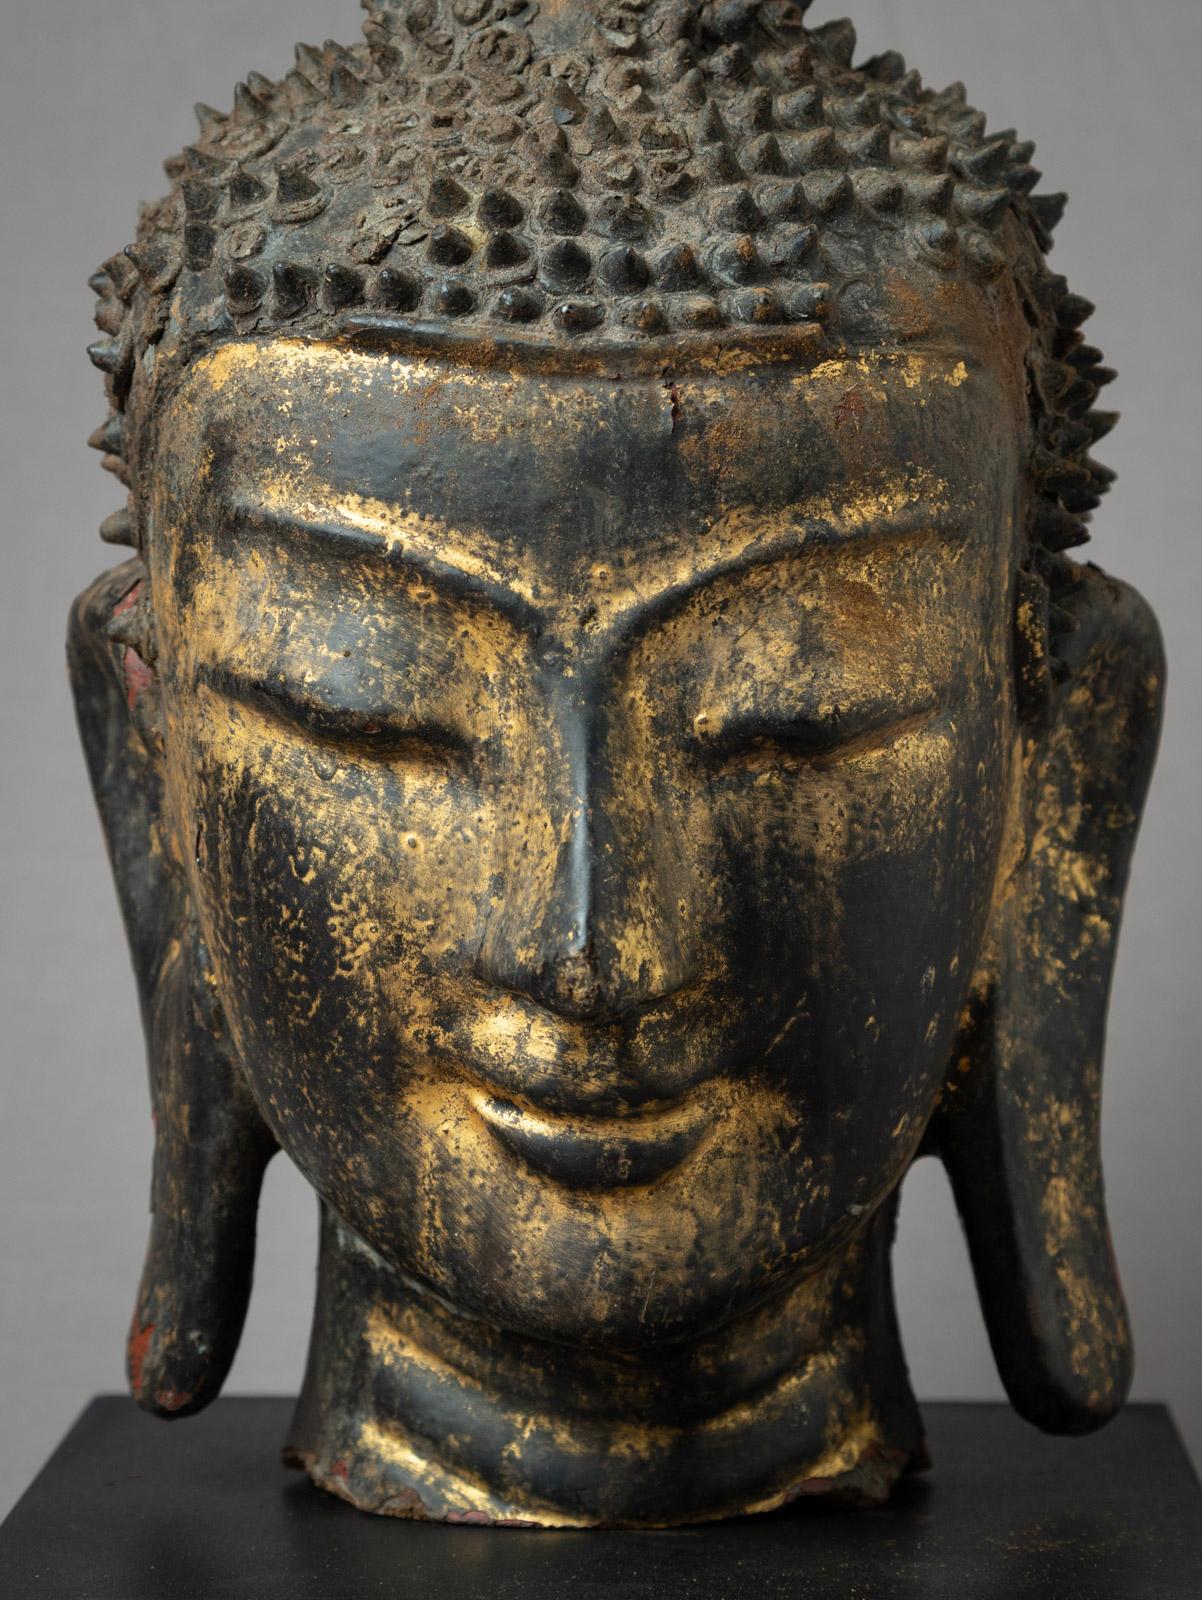 This Antique Burmese Buddha head, crafted from lacquerware, originates from Burma and belongs to the 18th century. It showcases the exquisite artistry of the Shan (Tai Yai) style. The Buddha head, measuring 48,5 cm in height, 24 cm in width, and 24